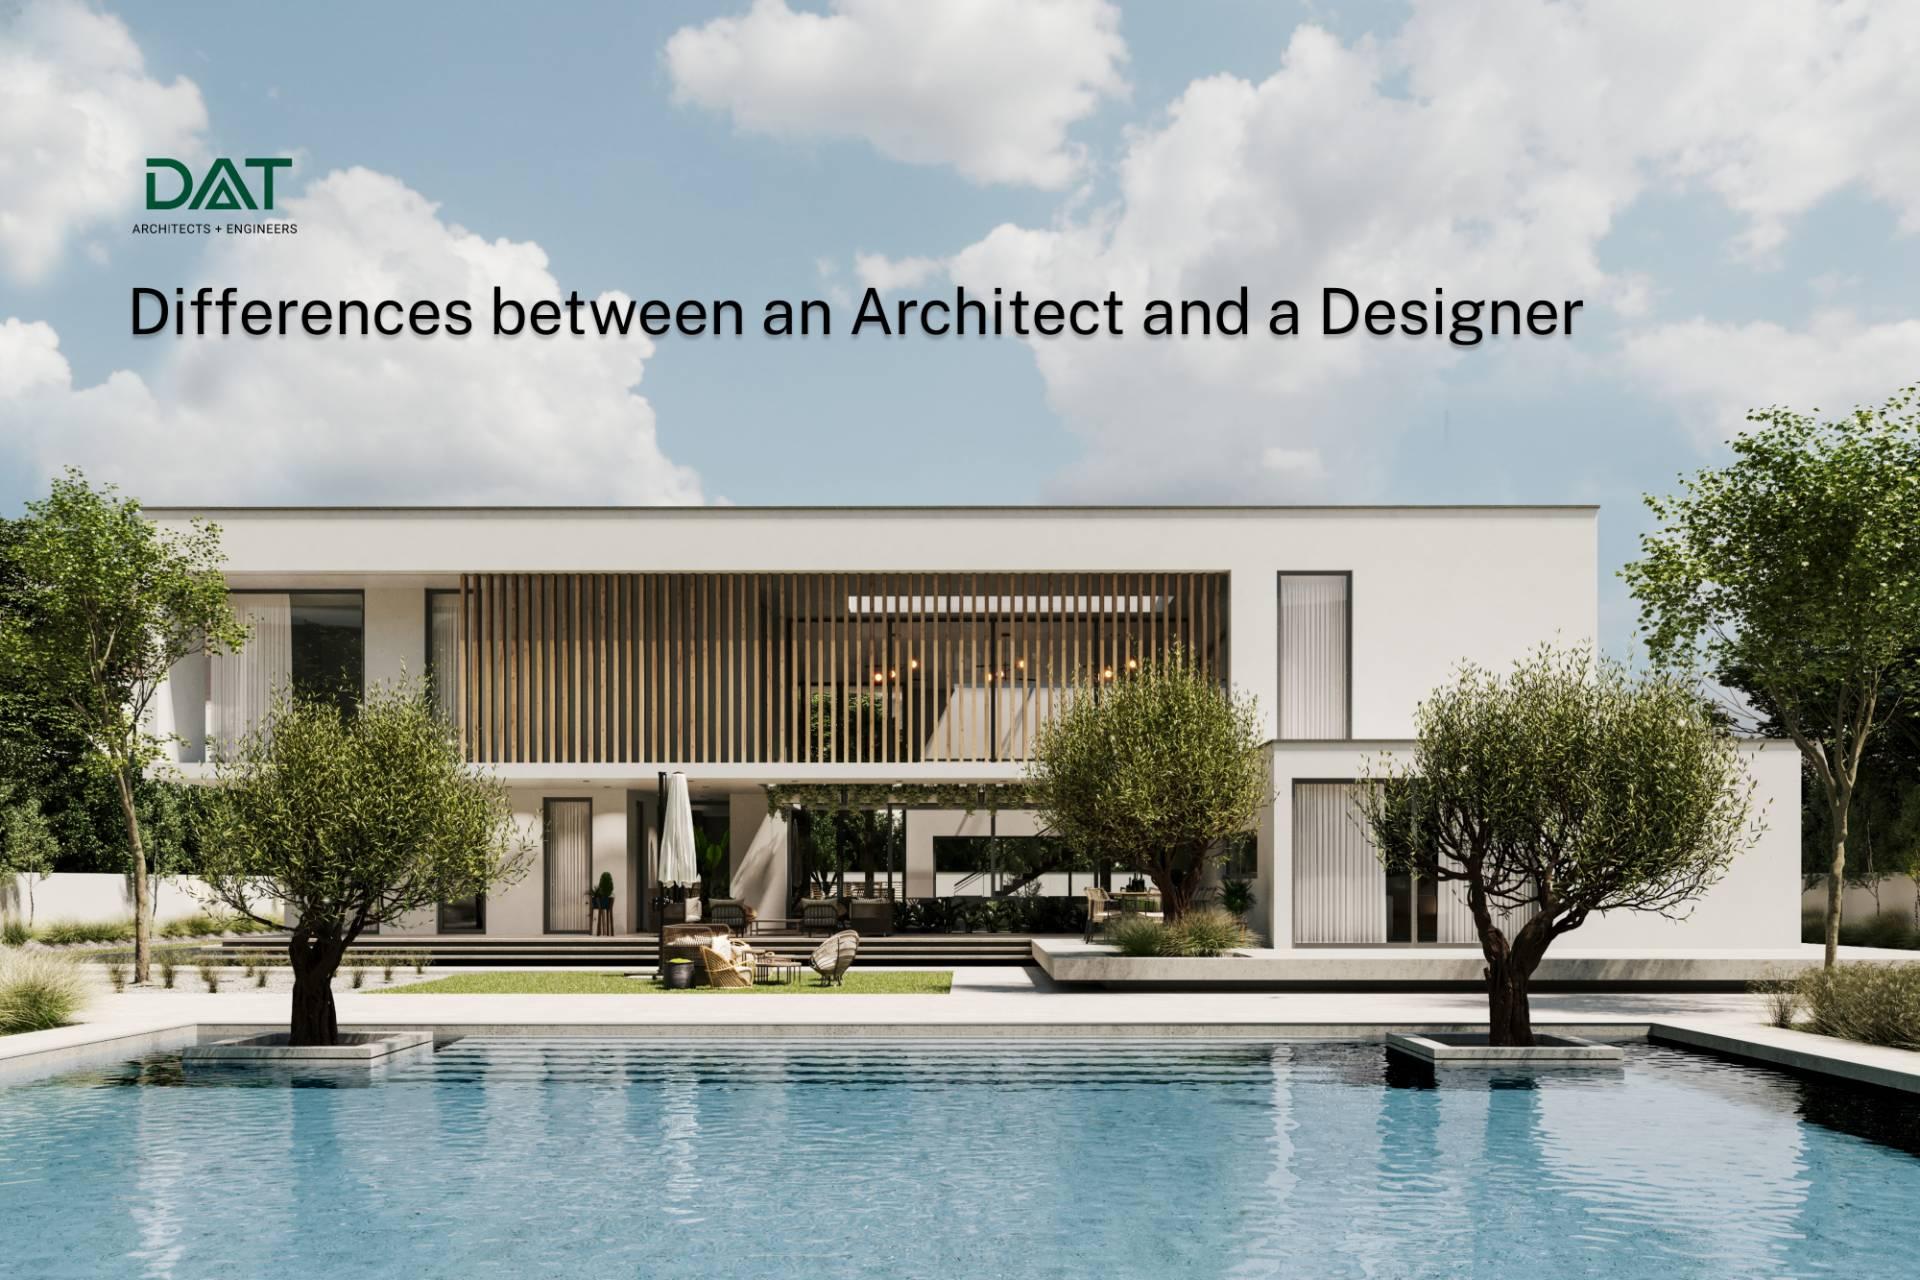 Differences between an Architect and a Designer